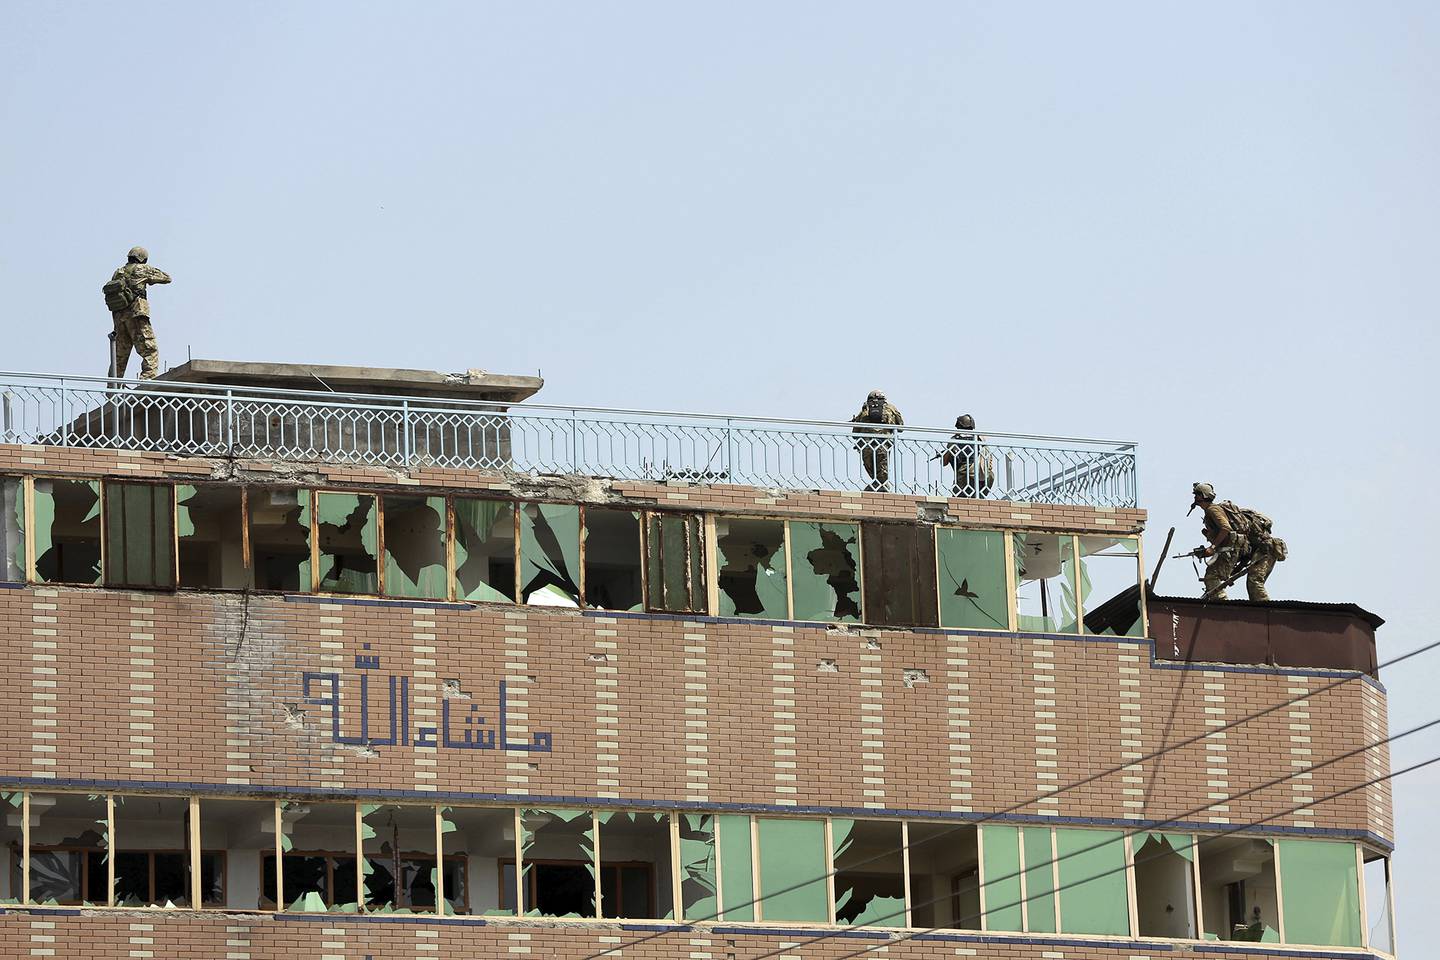 Afghan security personnel take position on the top of a building where insurgents were hiding, in the city of Jalalabad, east of Kabul, Afghanistan, Monday, Aug. 3, 2020.